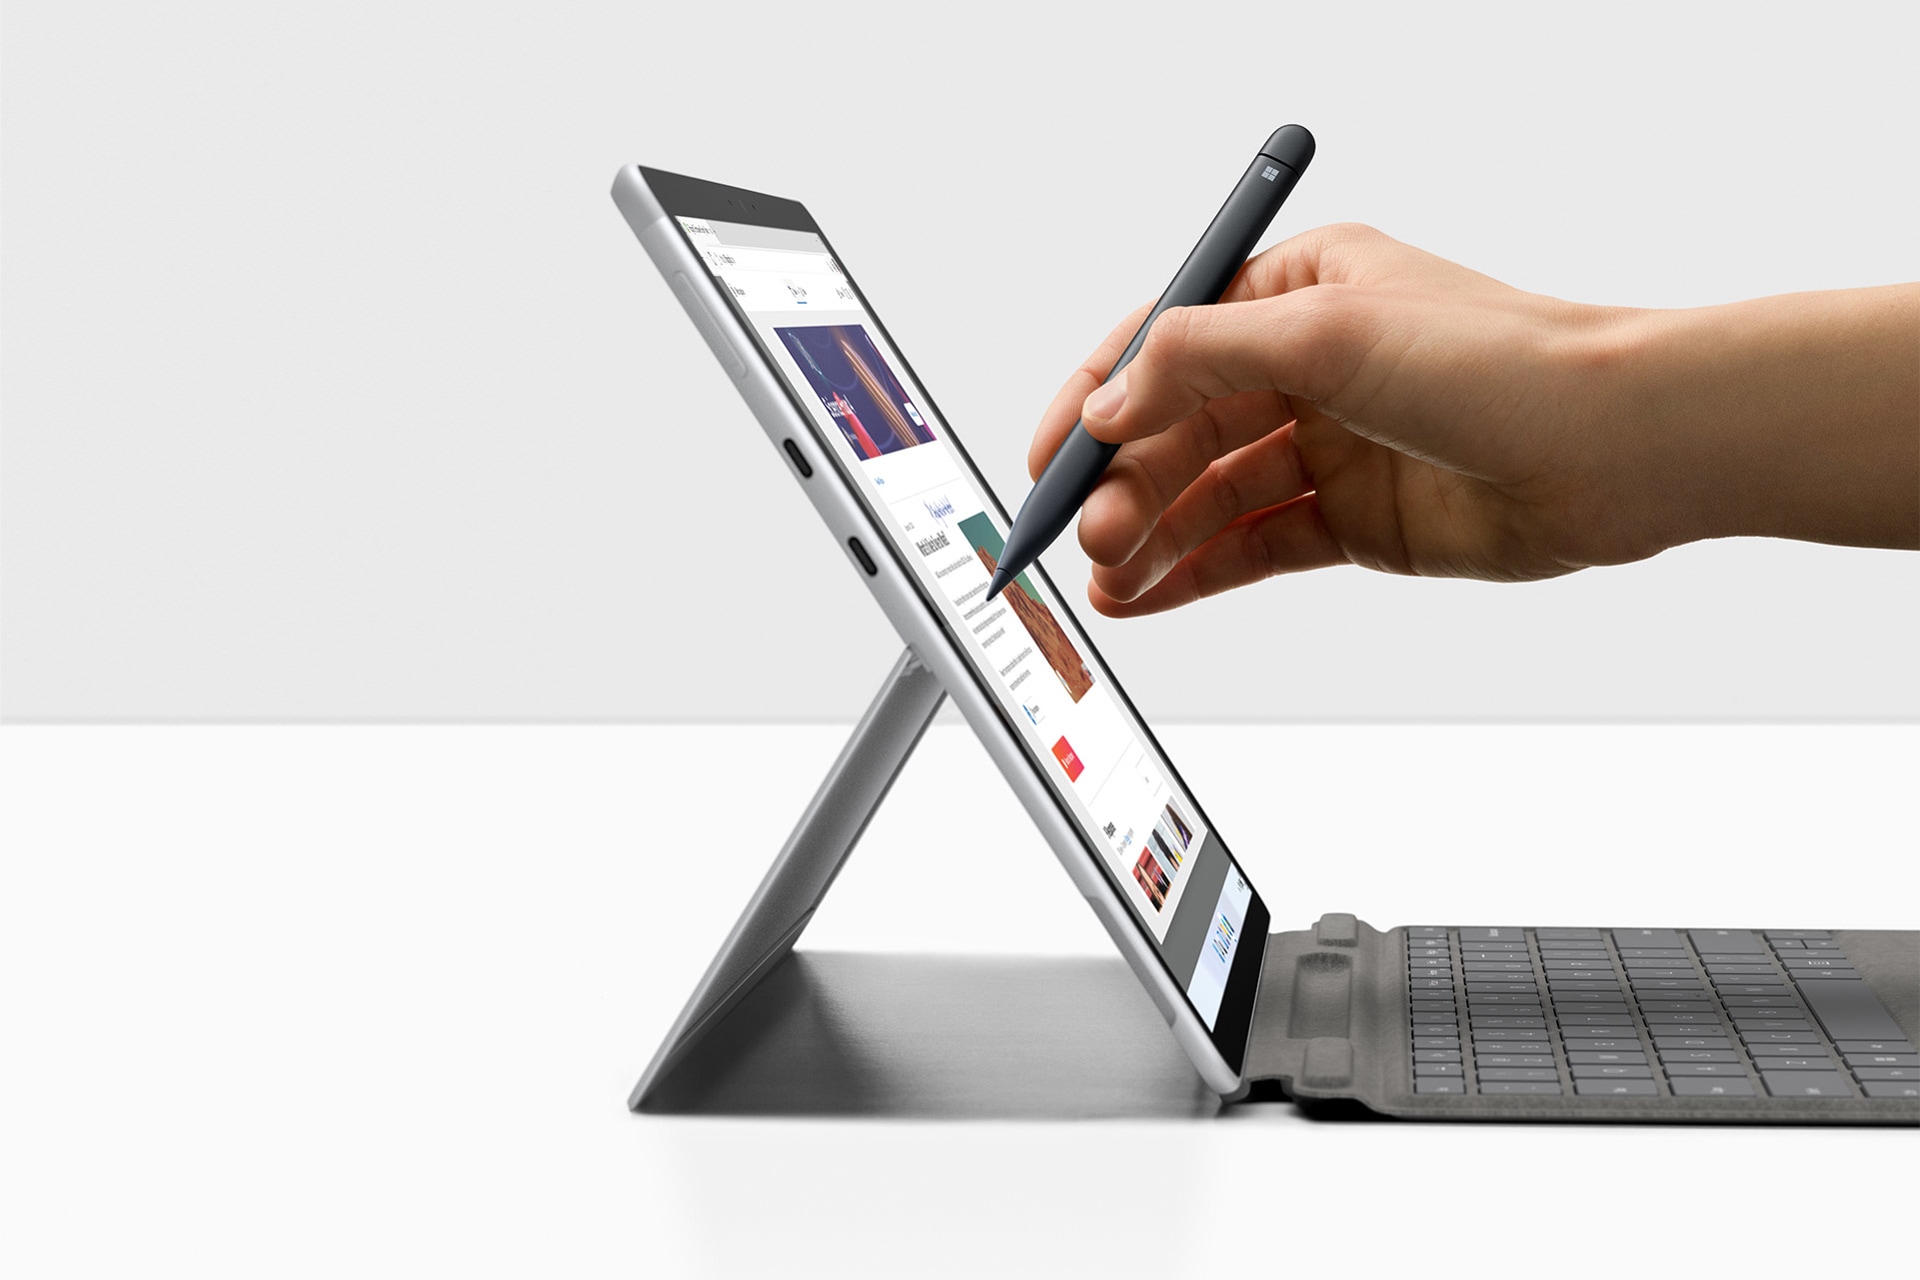 Surface Pro X being used with Surface Pen.